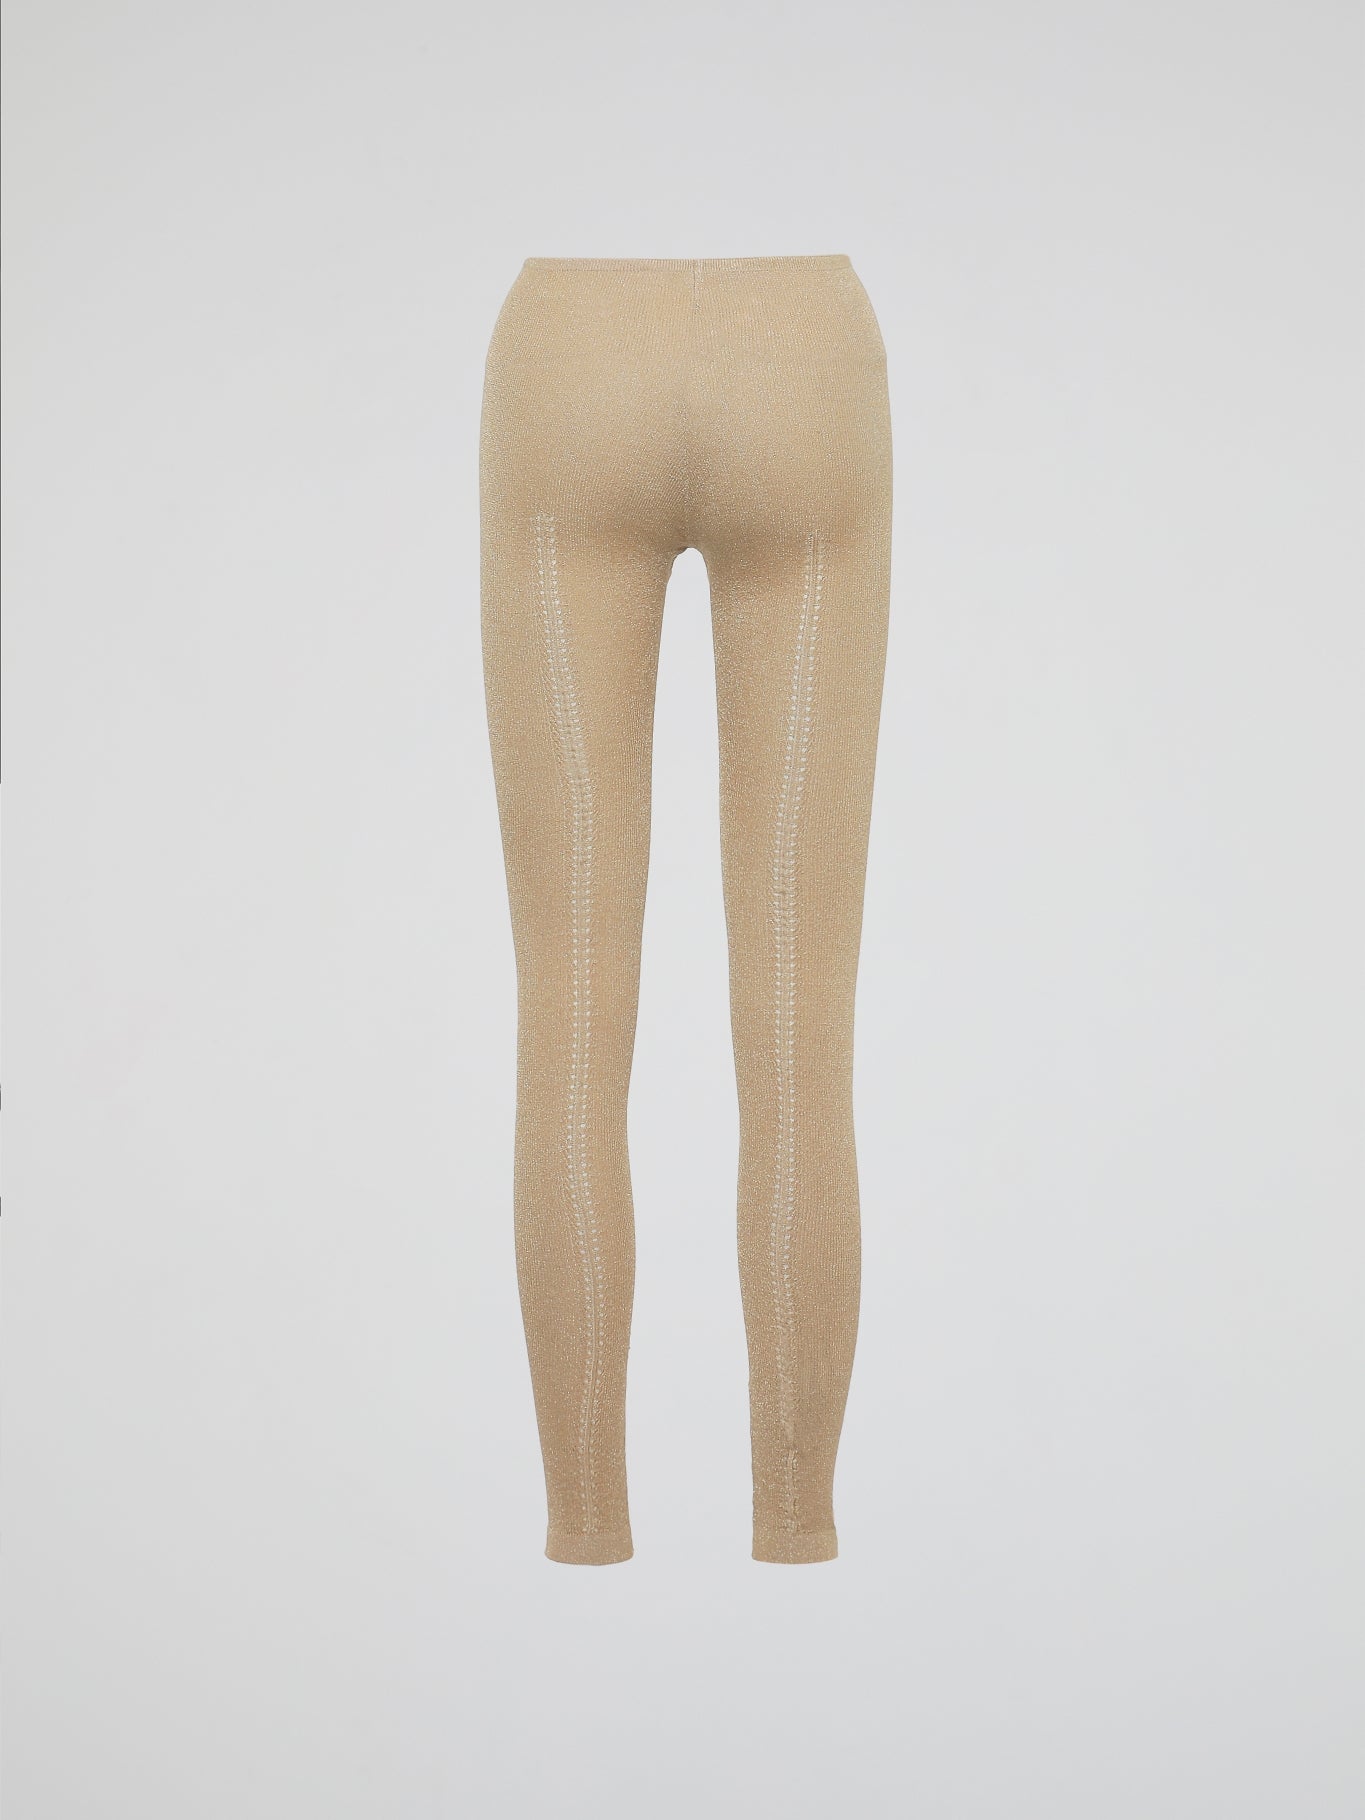 Wrap your legs in luxurious comfort and style with our Beige Knitted Leggings by Roberto Cavalli. Made from the finest quality fabrics, these leggings are expertly designed to provide a seamless fit that sculpts and contours your silhouette flawlessly. Whether you're lounging at home or stepping out for a night on the town, these leggings are the perfect blend of elegance and relaxation.